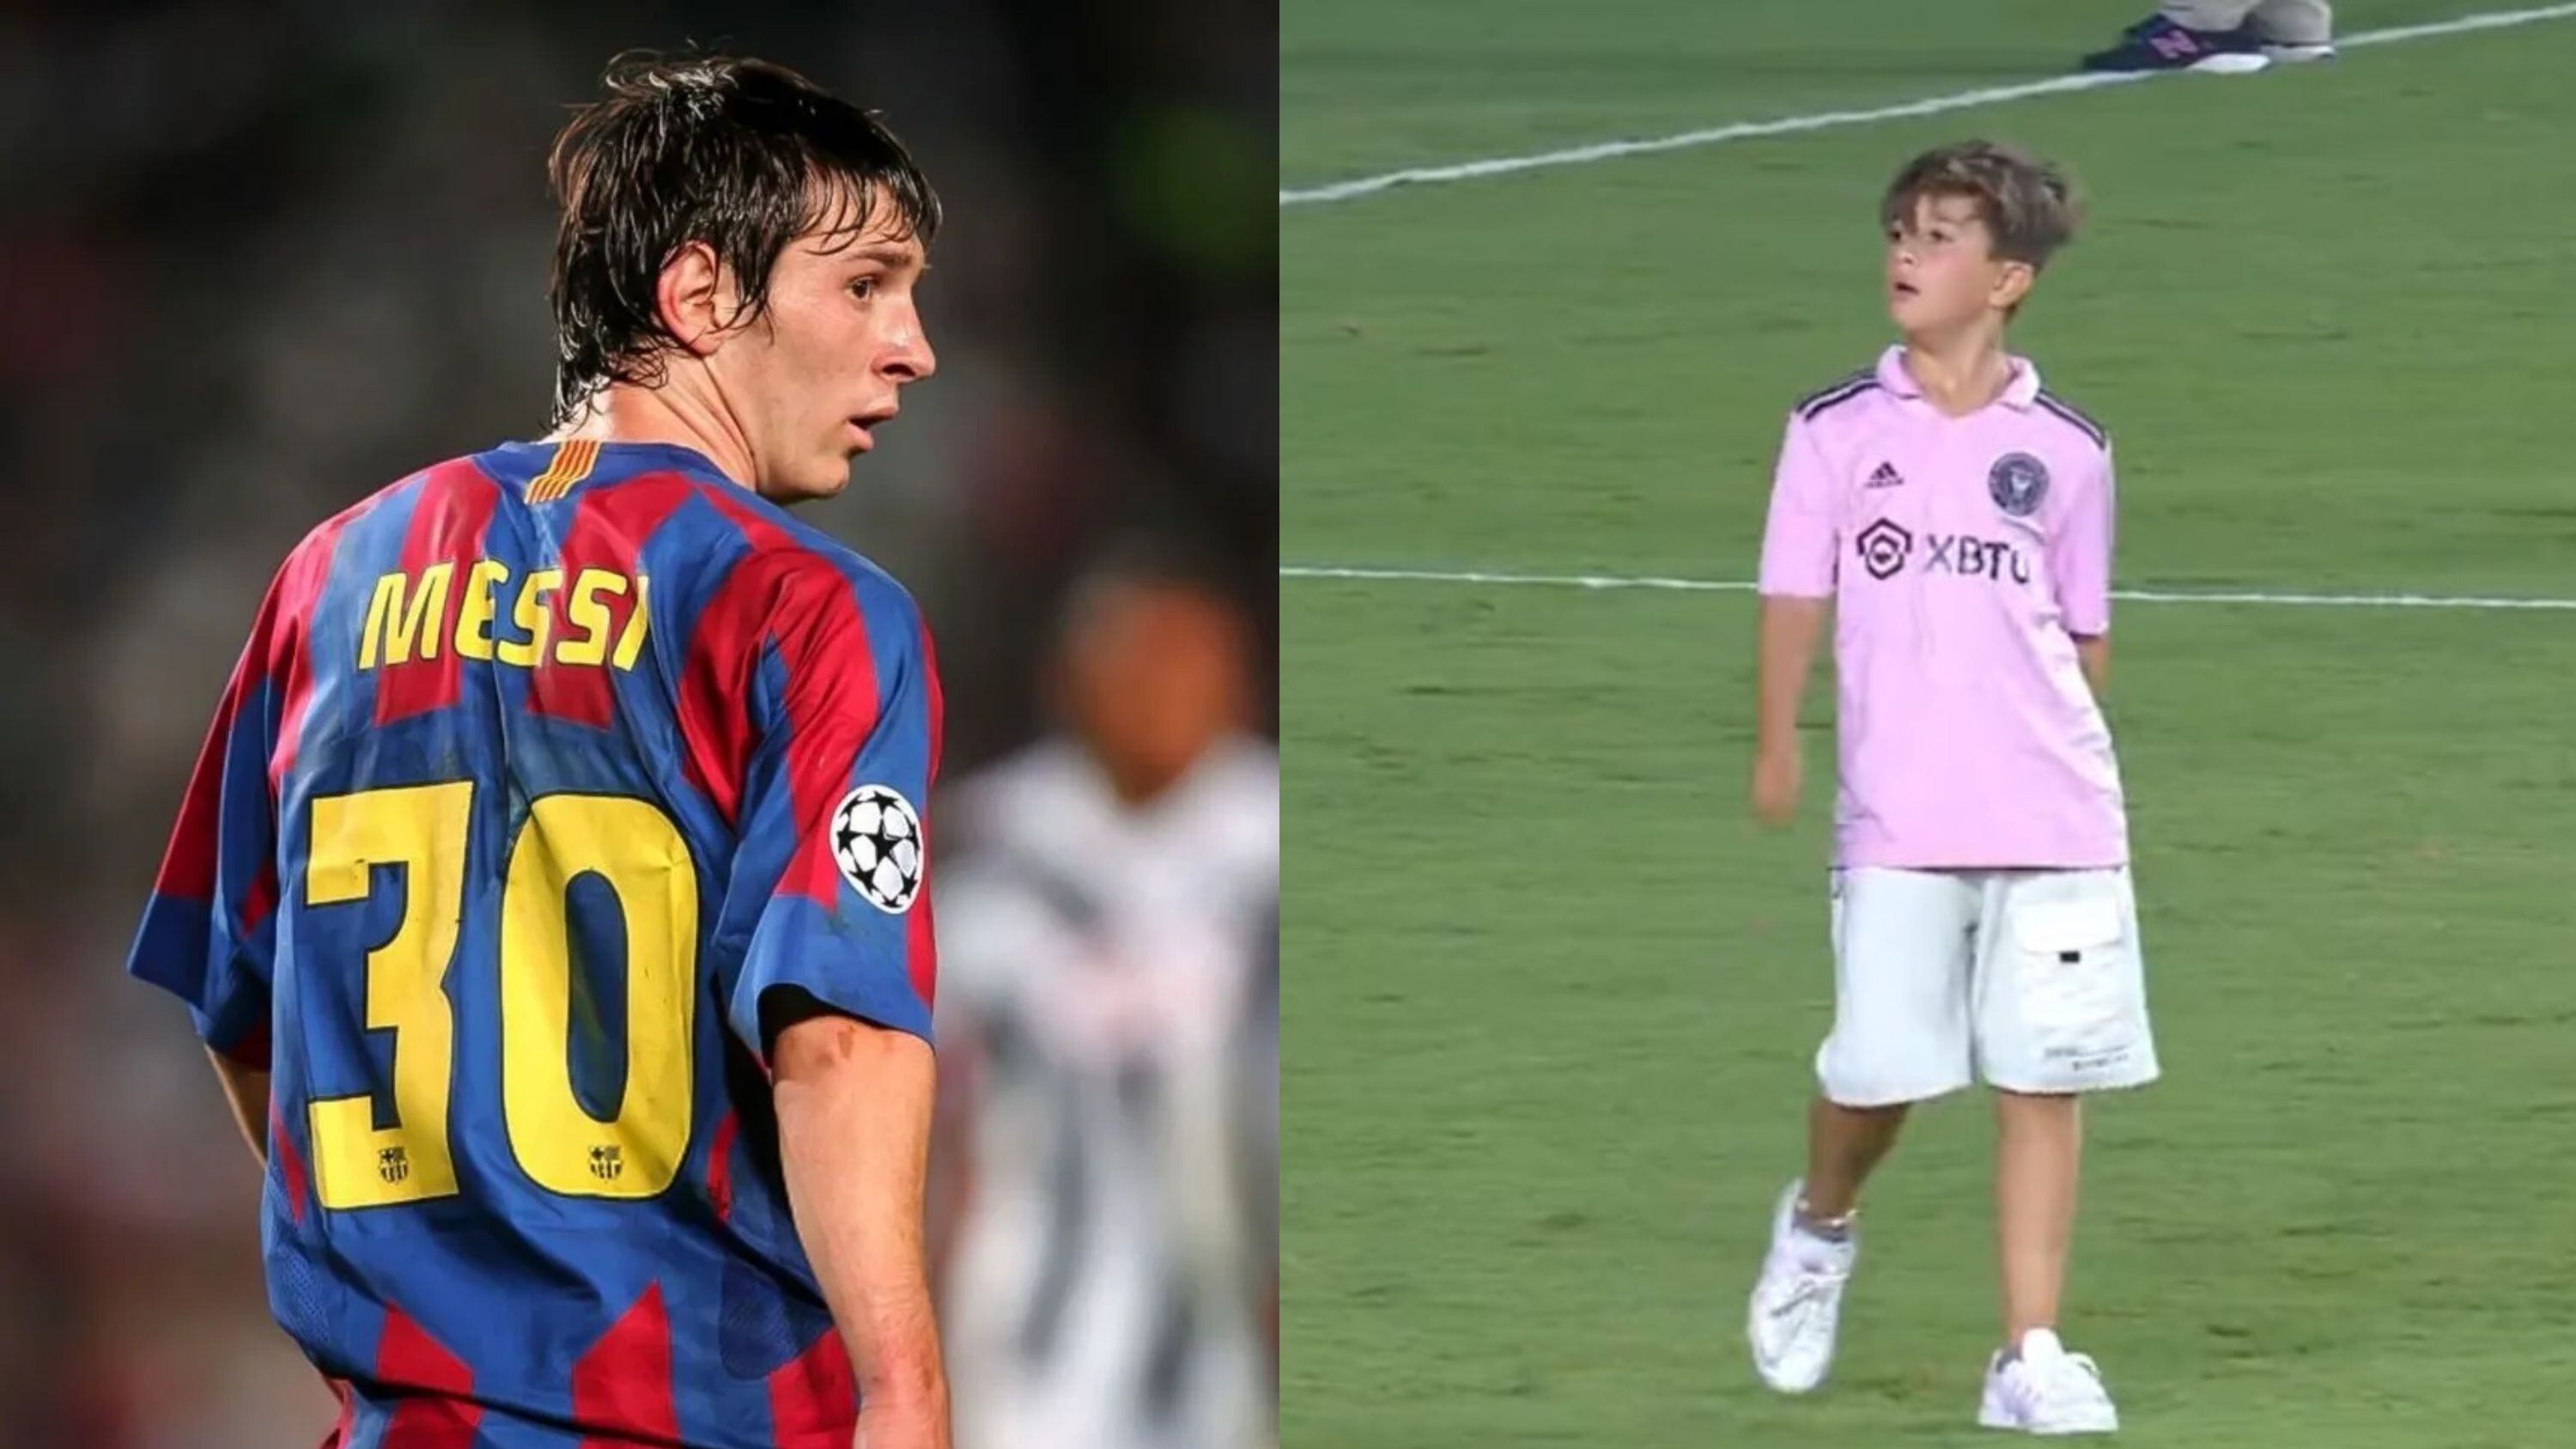 While Messi began with the number 30, the number that Thiago Messi has in Inter Miami U12